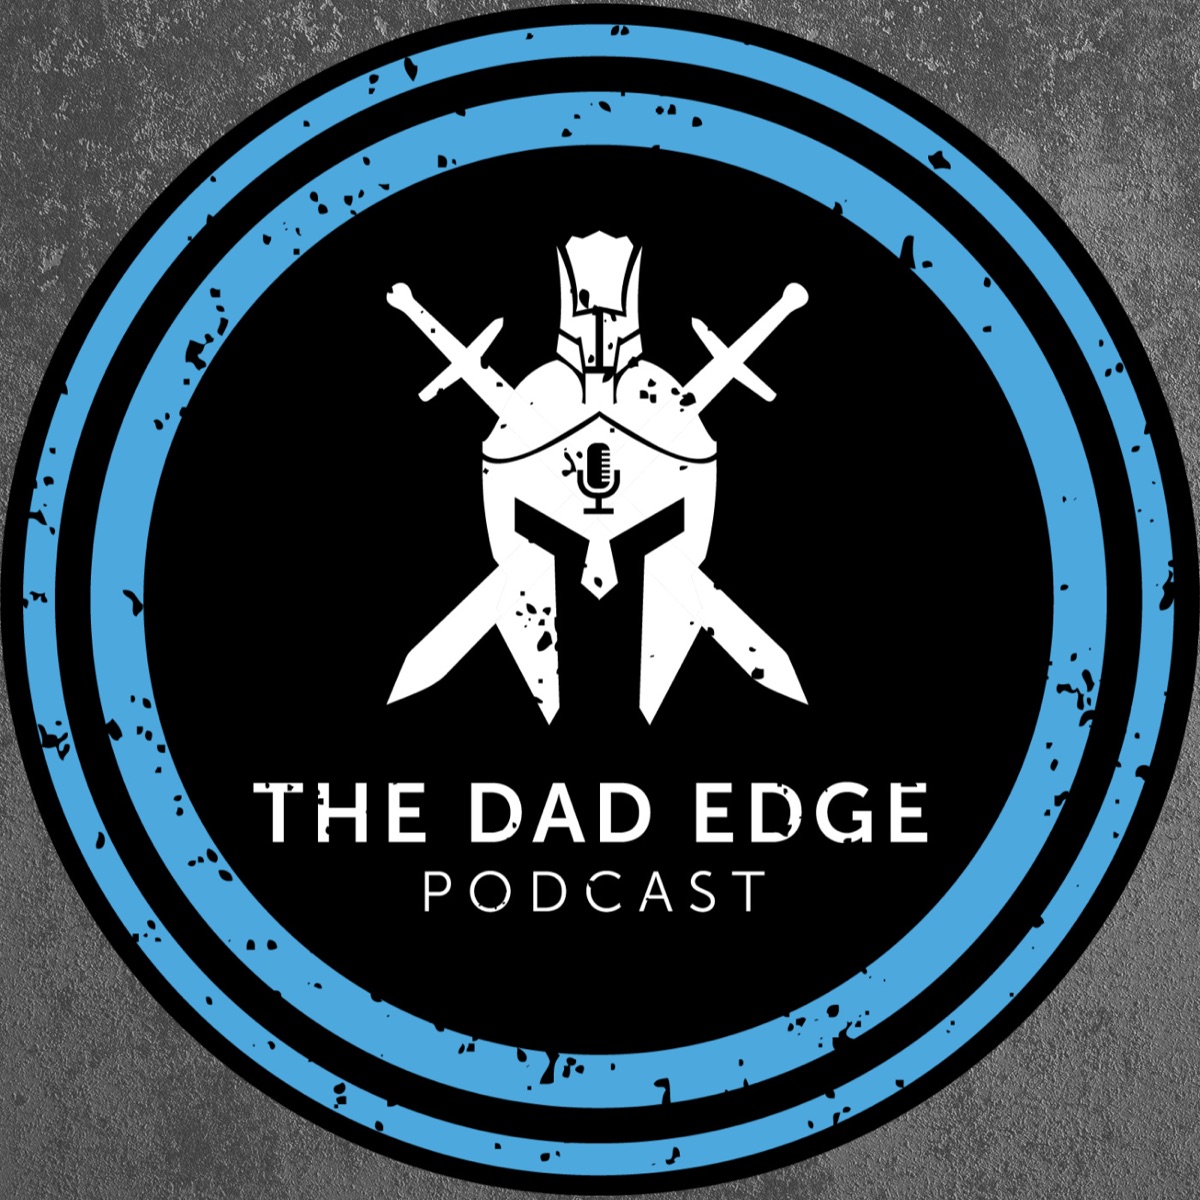 The Dad Edge Podcast Formerly The Good Dad Project Podcast Podcast Podtail